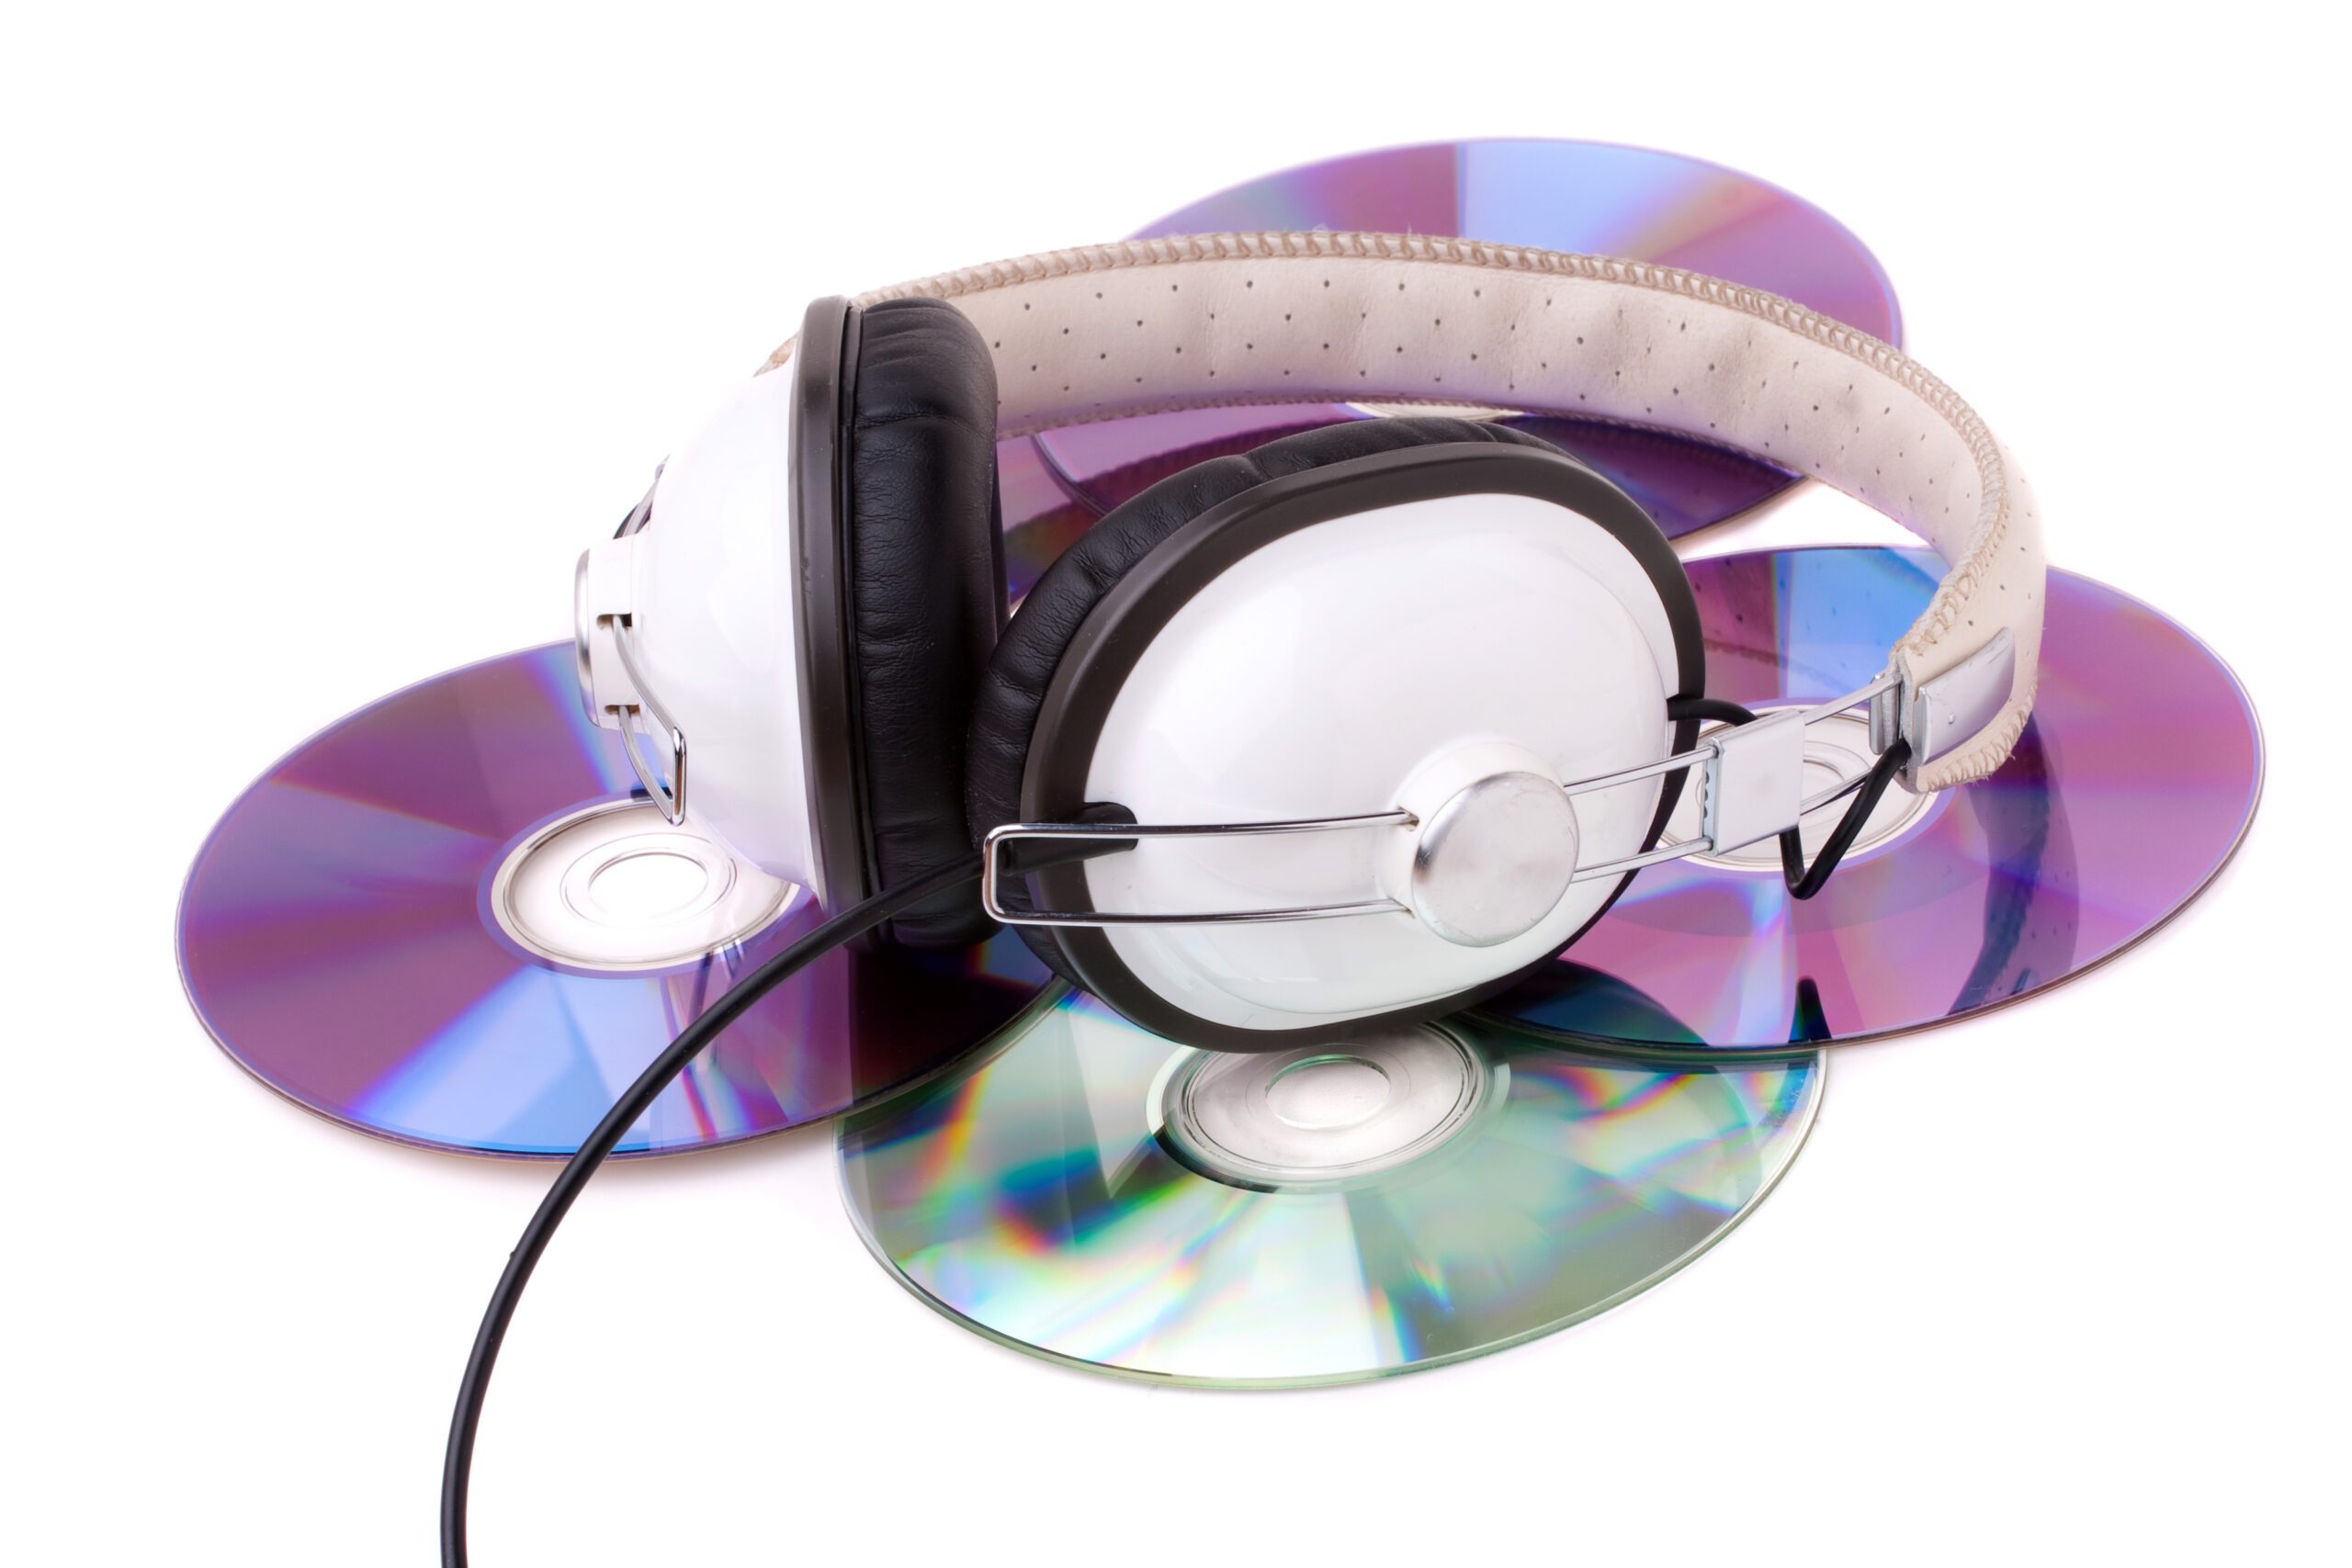 Headphones And Cds On A White Background.